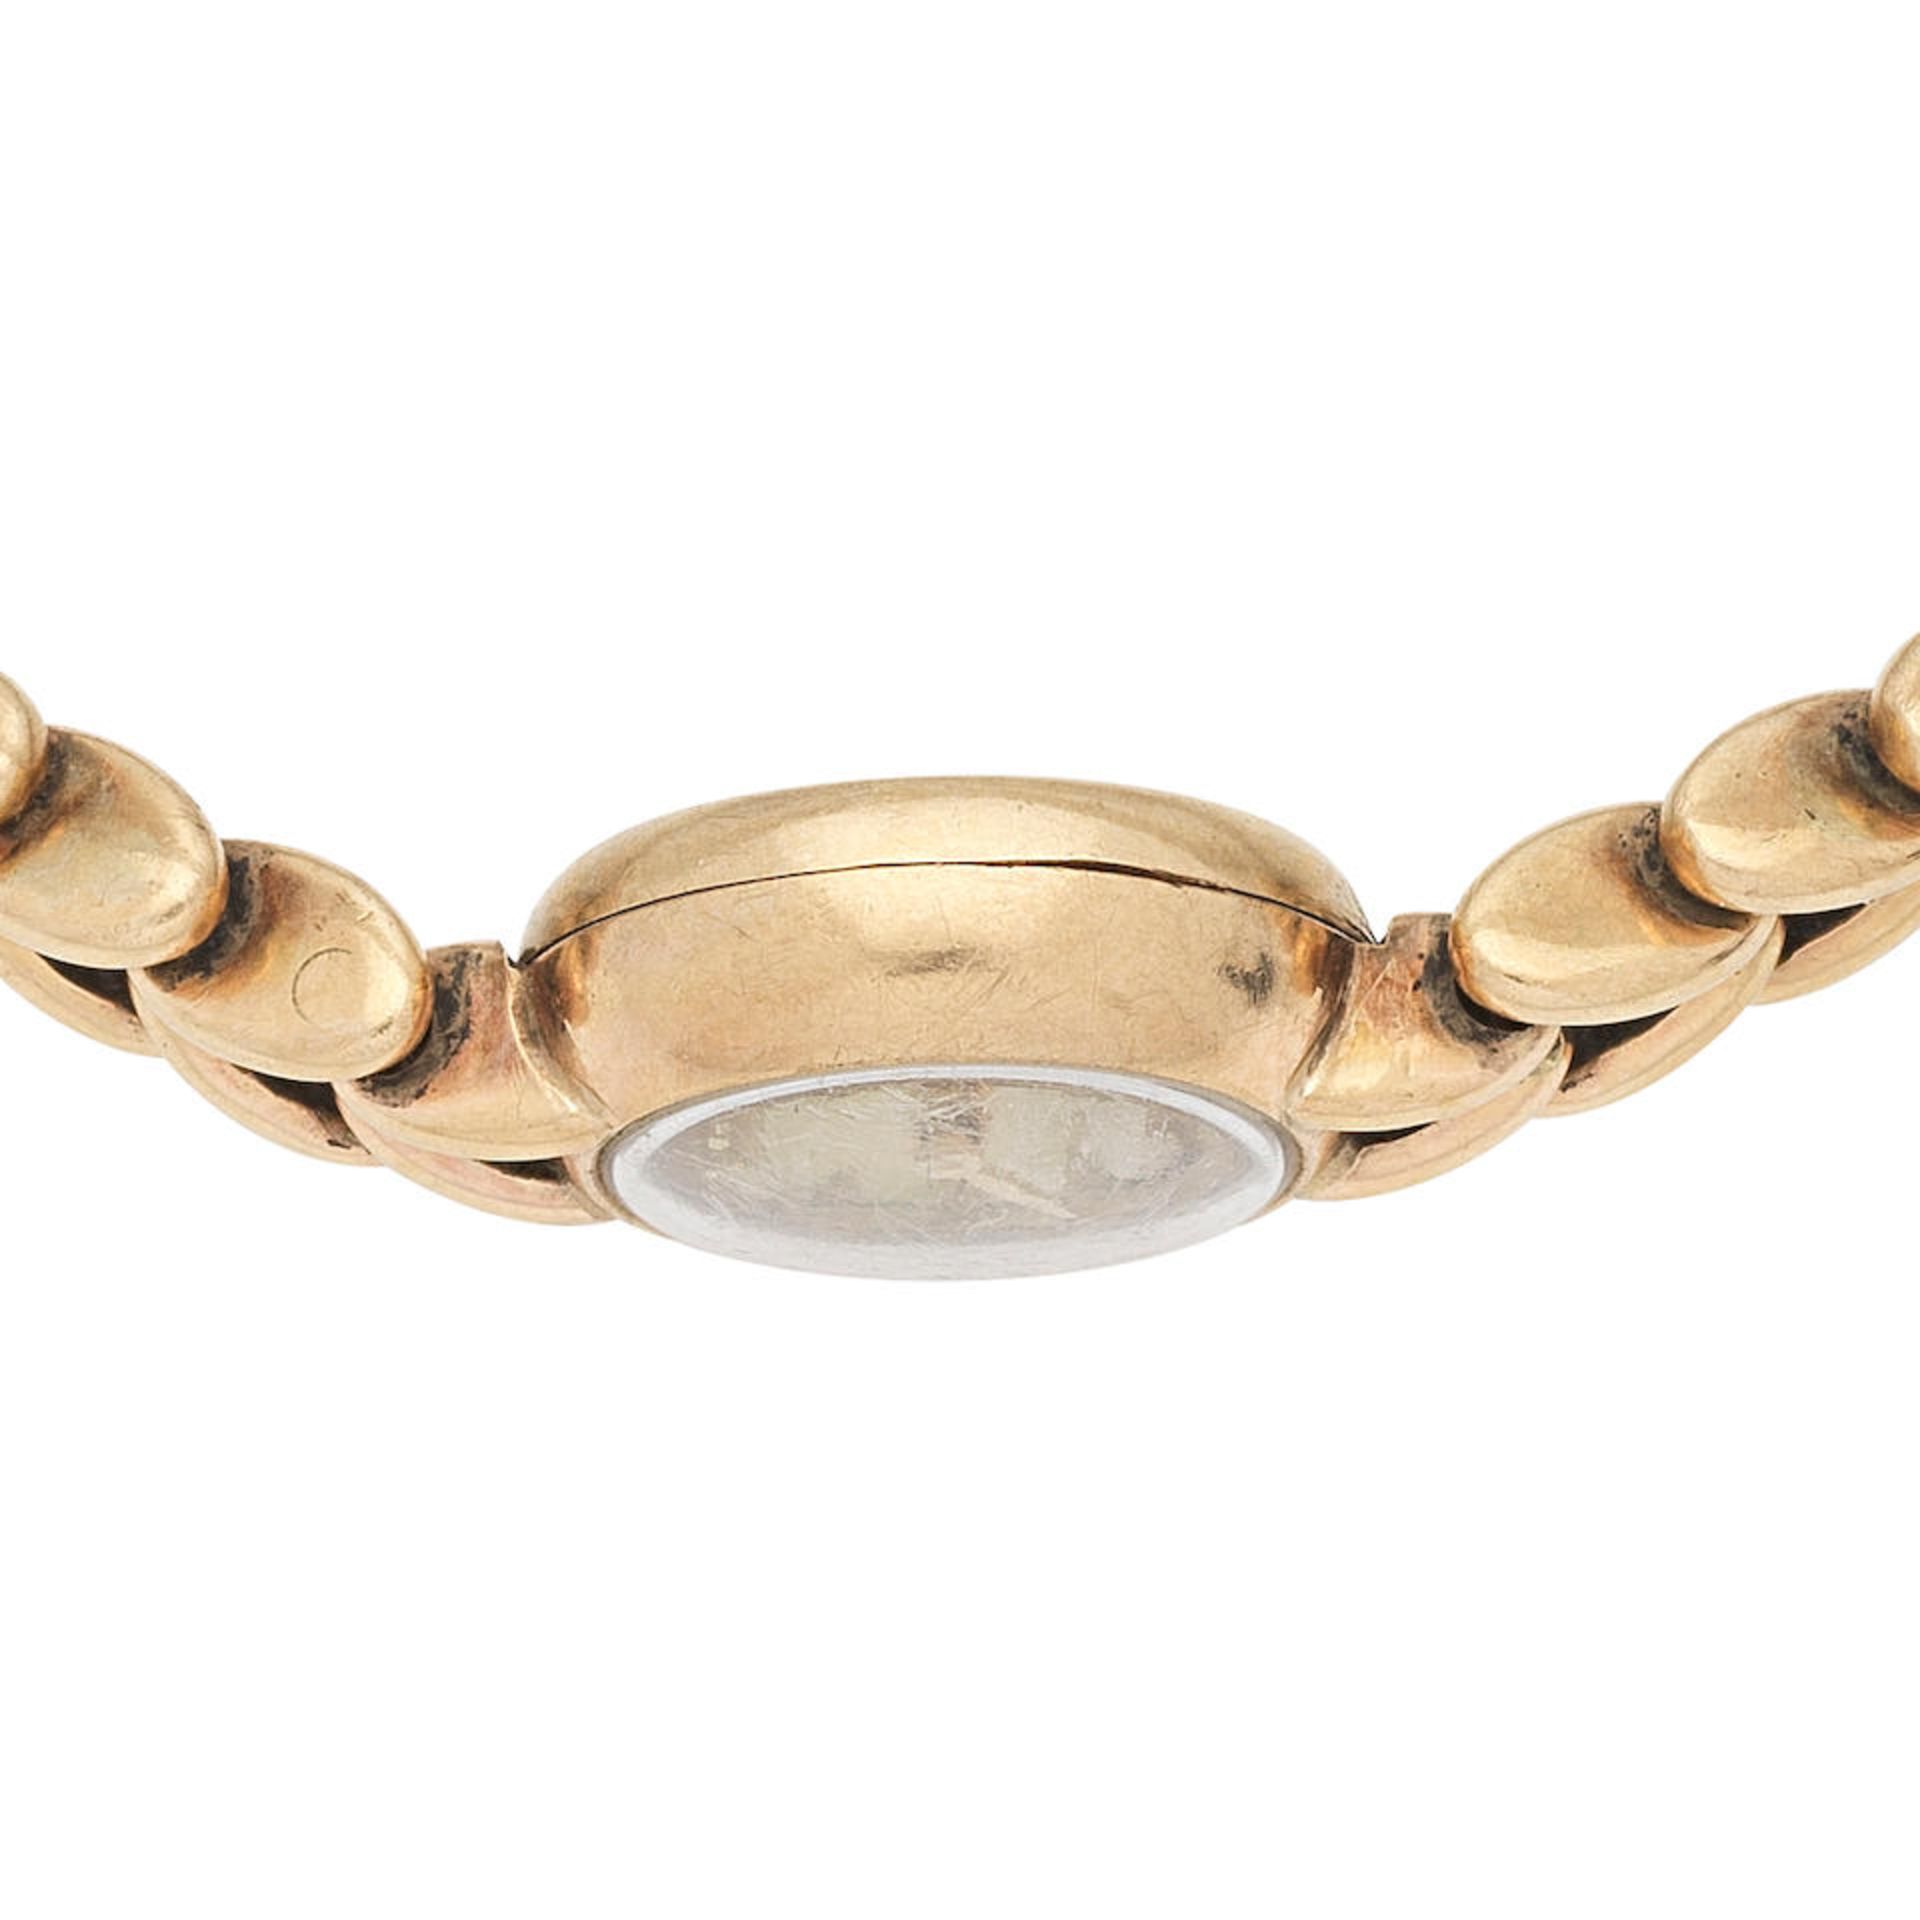 Rolex. A lady's 9K gold manual wind bracelet watch Chester Hallmark for 1958 - Image 2 of 4